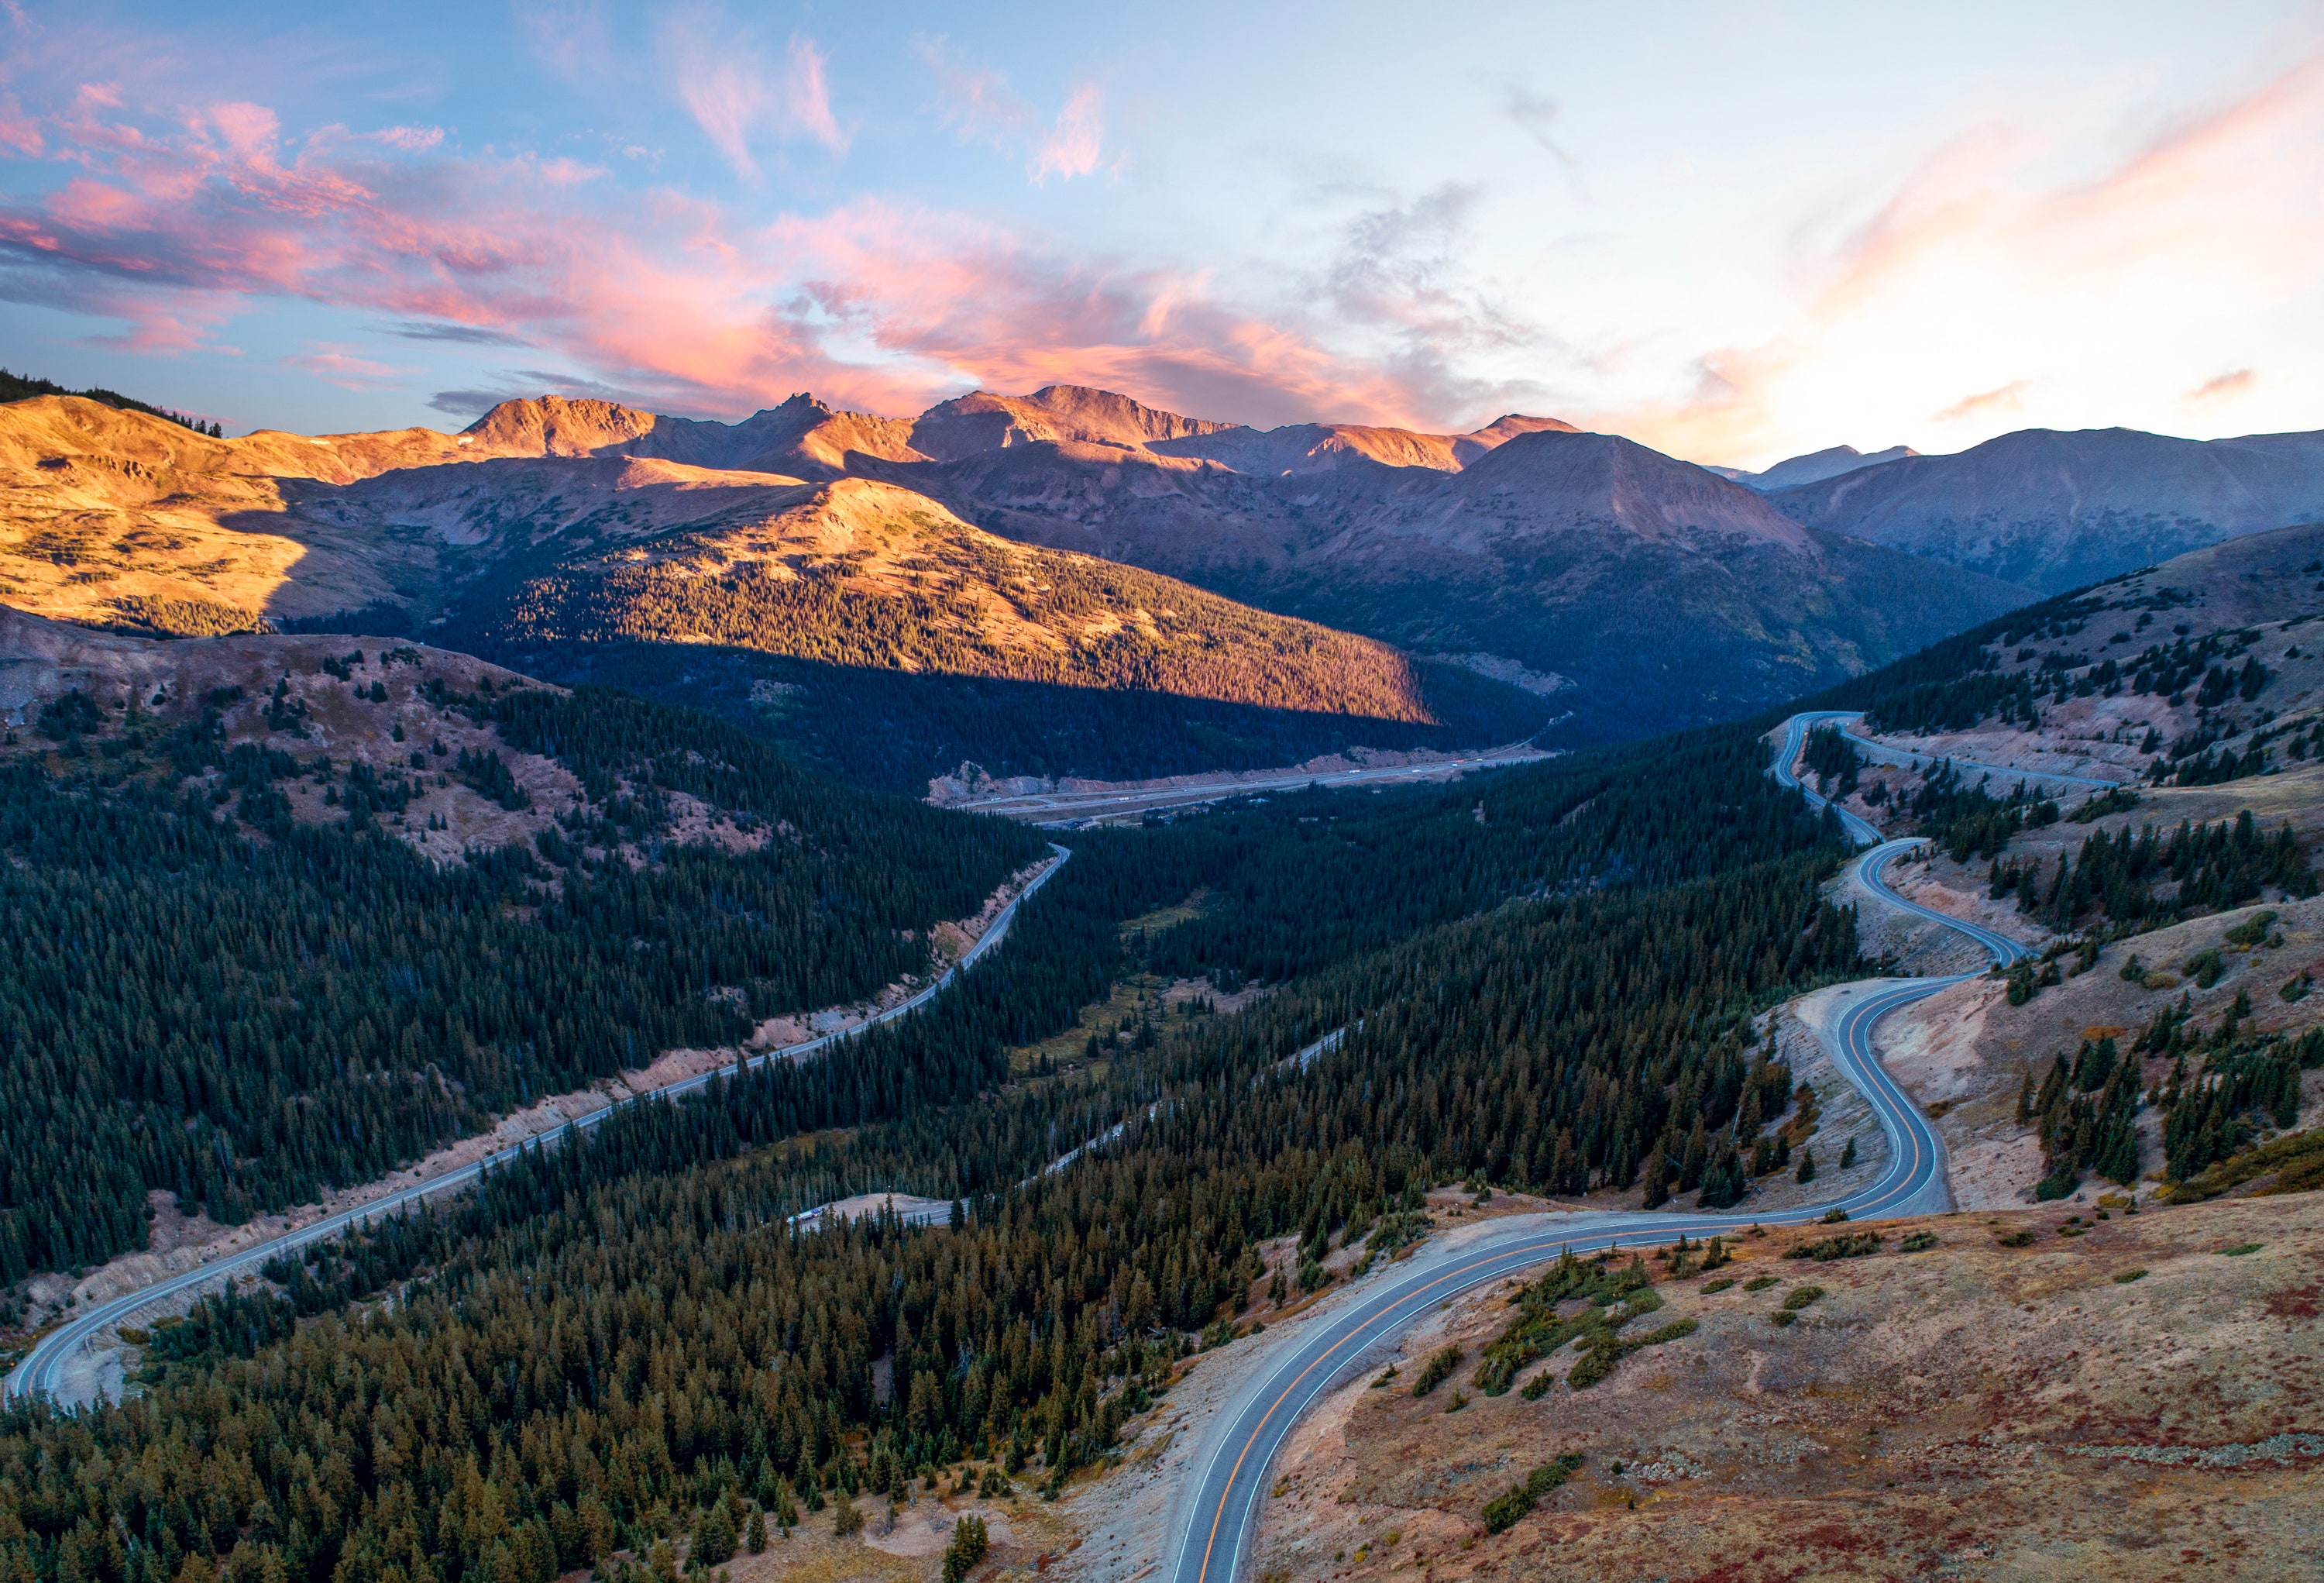 <p>Not all great road trip ideas require weeks to complete. From one charming and buzzy Colorado city to the next, this approximately 200-mile journey from Denver to <a href="https://www.cntraveler.com/story/where-to-eat-stay-and-play-in-aspen-colorado?mbid=synd_msn_rss&utm_source=msn&utm_medium=syndication">Aspen</a> ascends through the heart of the Rocky Mountains. With winding roads and towering peaks, take your time on this high mountain drive via the Independence Pass–only open from mid May till mid September–reaching an elevation of over 12,000 ft.</p> <p><strong>Where to stop:</strong> When in Denver, stop at the <a href="https://www.cntraveler.com/activities/denver/red-rocks-amphitheatre?mbid=synd_msn_rss&utm_source=msn&utm_medium=syndication">Red Rocks Park and Amphitheatre</a> for the city’s artful-energy center and iconic red rock formations–all adjacent to a view of the skyline. From there, drive through the old-time charm of downtown <a href="https://www.cntraveler.com/story/what-its-like-to-climb-a-rocky-mountain-via-ferrata?mbid=synd_msn_rss&utm_source=msn&utm_medium=syndication">Idaho Springs</a>, lined with Victorian-era buildings along the streets. Next up: the fabulous mountain resort town of Vail for a stroll through the village. Admire the chic and quirky boutiques and galleries, or stay overnight to soak in the surrounding slopes. From there, head to <a href="https://www.cntraveler.com/stories/2014-11-10/is-aspen-colorado-too-popular-for-its-own-good?mbid=synd_msn_rss&utm_source=msn&utm_medium=syndication">Glenwood Springs</a>, a haven for rejuvenation renowned for its natural hot springs. Only an hour away is the tres-chic, surreal, and stunning city of Aspen. Stay for a few days to make the most of your trip–from high-end designer shops and galleries downtown to the vibrance of colors in the mountain trees surrounding, the city is easy to fall in love with.</p> <p><strong>Where to eat:</strong> In Denver, make sure to sit down for a meal from the seasonal menu of Spuntino. When stopping in Glenwood Springs, pick up tacos at the cute and convenient <a href="https://slopeandhatch.com/">Slope and Hatch</a>. To celebrate your arrival in Aspen, Bear’s Den is aesthetic and cozy for lunch; while French Alpine Bistro is a must for dinner.</p> <p><strong>Where to stay:</strong> For a base in Denver’s Lower Downtown, lay your head at a room in the <a href="https://www.cntraveler.com/hotels/denver/the-rally-hotel?mbid=synd_msn_rss&utm_source=msn&utm_medium=syndication">The Rally Hotel</a>. If you have time to extend your trip for a mid-point check in at Vail, stay at <a href="https://www.cntraveler.com/hotels/united-states/vail/the-sebastian-vail?mbid=synd_msn_rss&utm_source=msn&utm_medium=syndication">The Sebastian,</a> located in the heart of the Village. When finally in Aspen, reward yourself with a stay at the <a href="https://www.cntraveler.com/hotels/united-states/aspen/hotel-jerome-aspen?mbid=synd_msn_rss&utm_source=msn&utm_medium=syndication">Hotel Jerome, Auberge Resorts Collection</a>, or the <a href="https://www.cntraveler.com/hotels/aspen/st-regis-aspen-resort-aspen-colorado?mbid=synd_msn_rss&utm_source=msn&utm_medium=syndication">St. Regis</a>.</p><p>Sign up to receive the latest news, expert tips, and inspiration on all things travel</p><a href="https://www.cntraveler.com/newsletter/the-daily?sourceCode=msnsend">Inspire Me</a>